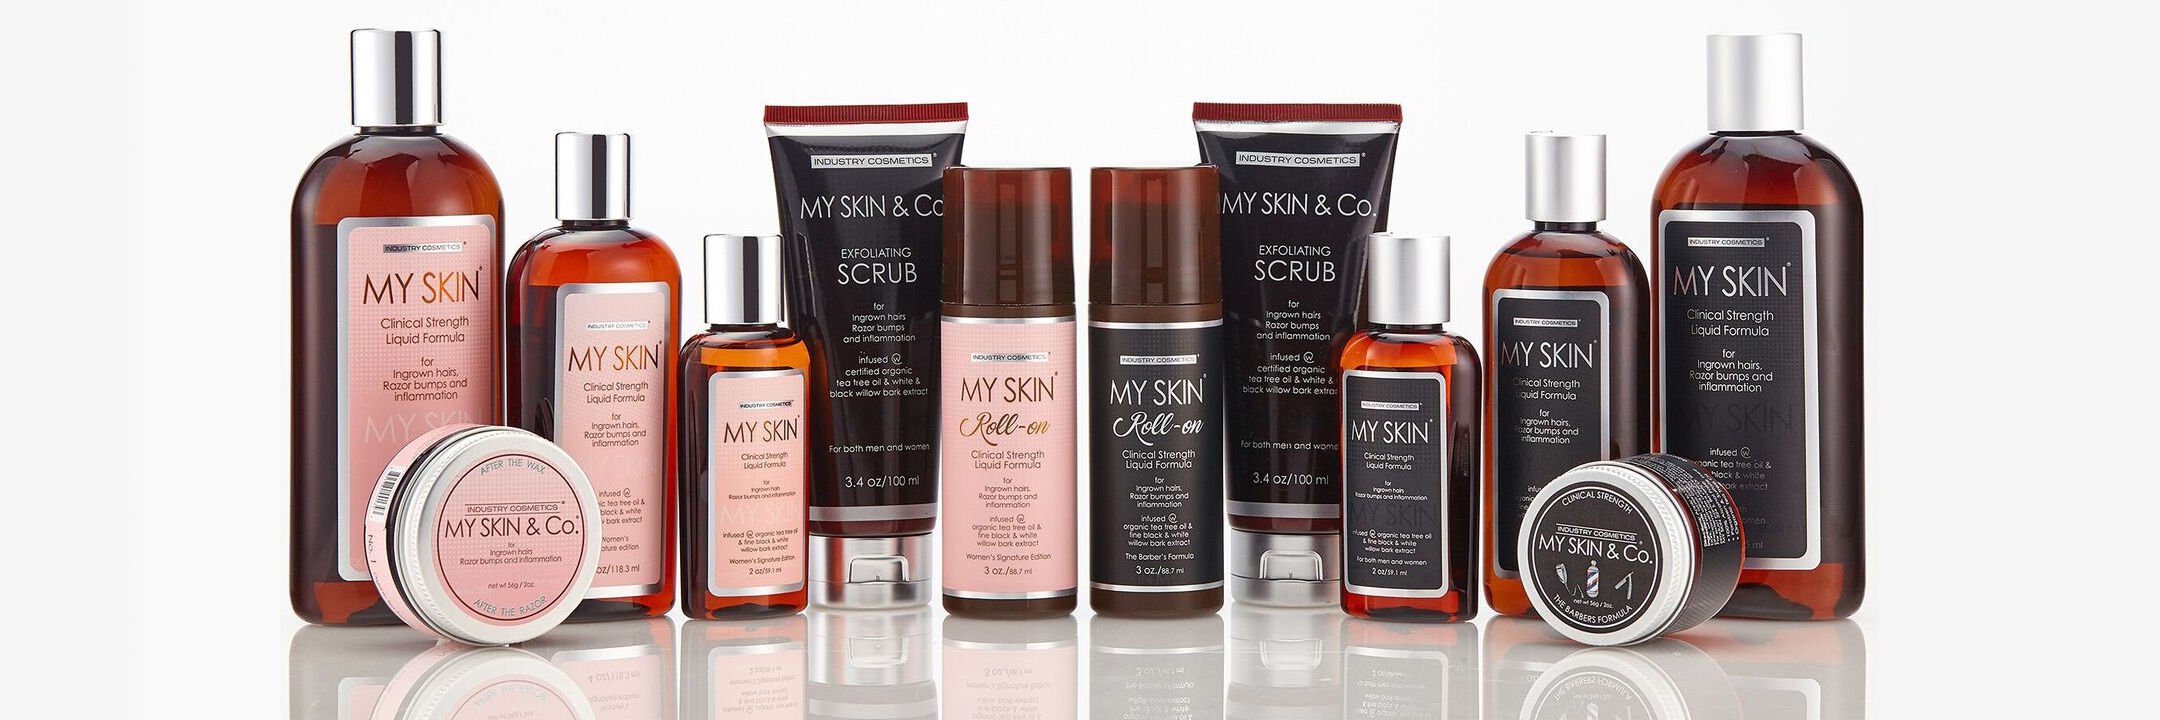 Go My Skin's Complete line of products